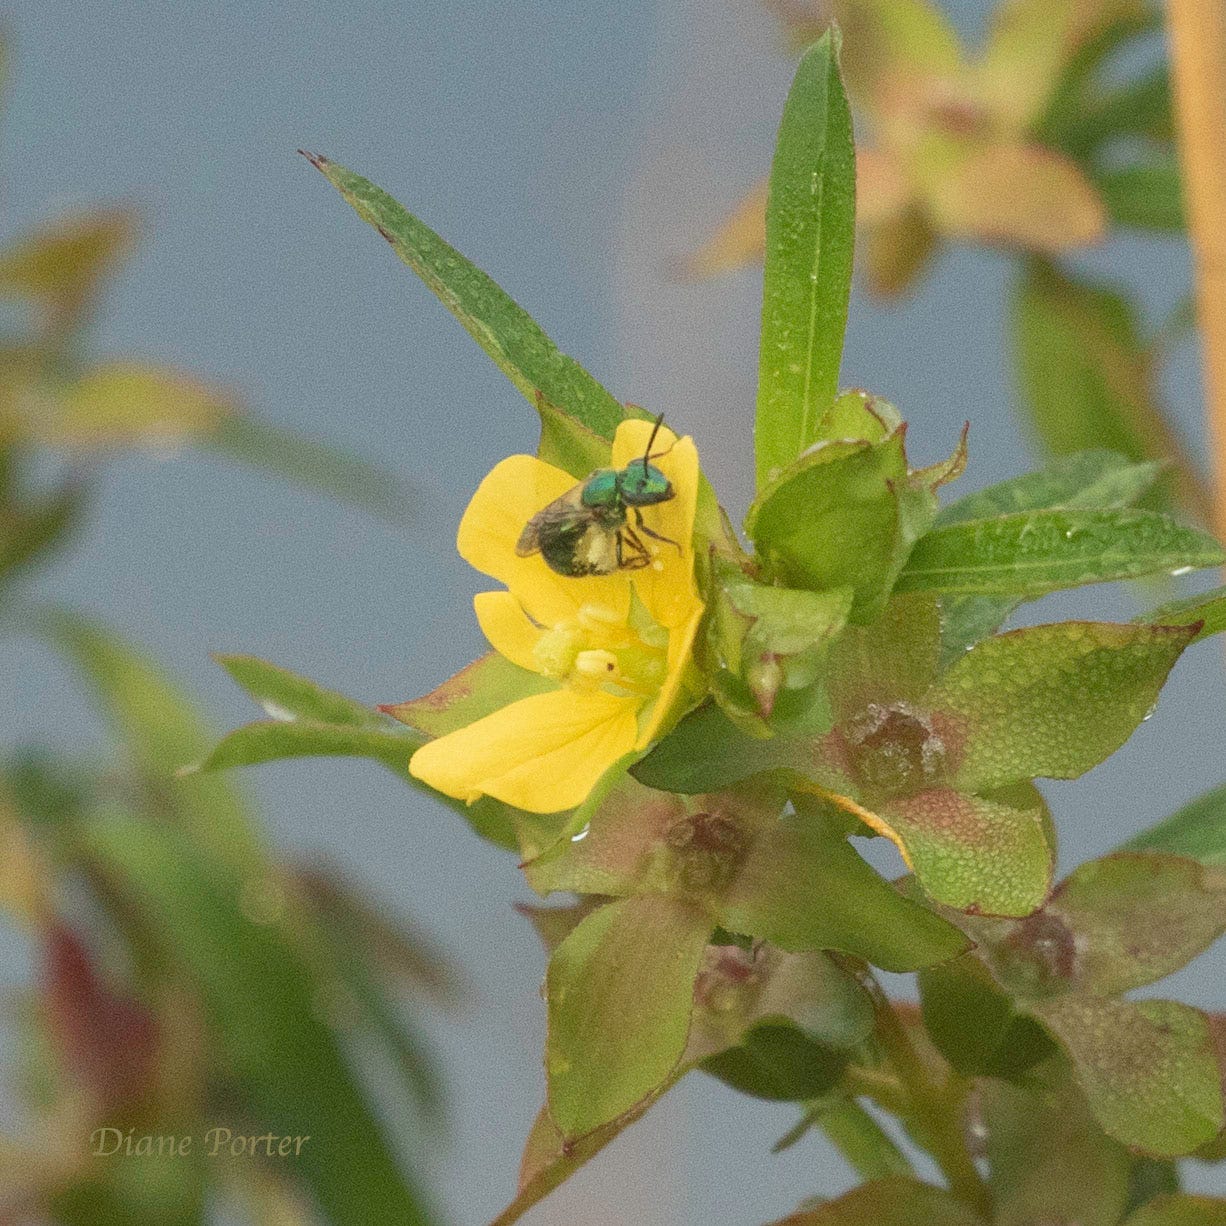 Seedbox blossom with small green Halictid bee visiting it for pollen.